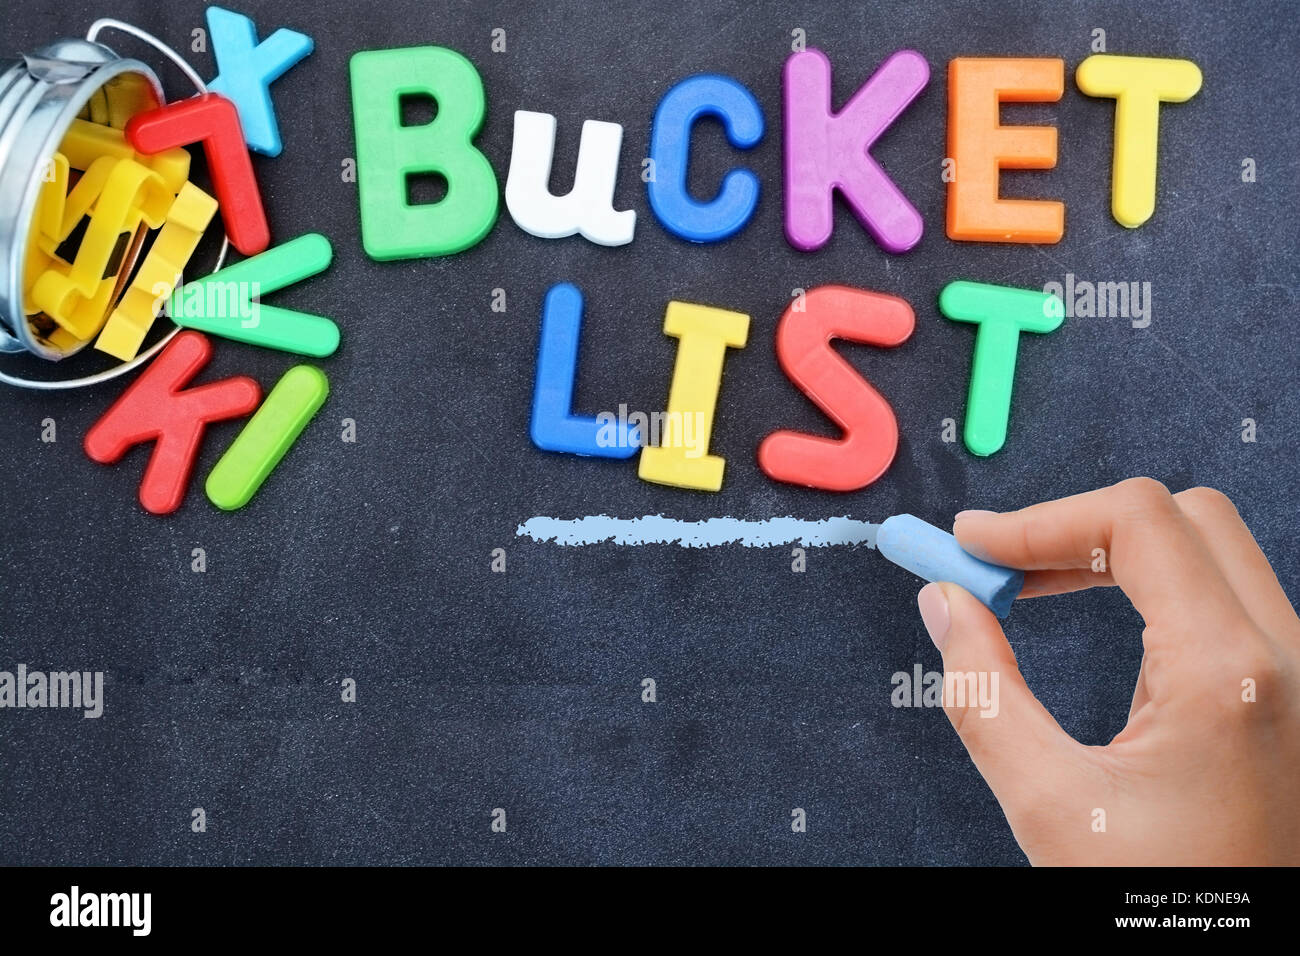 Young woman prepared for bucket list with metallic bucket and colorful plastic letters on blackboard Stock Photo